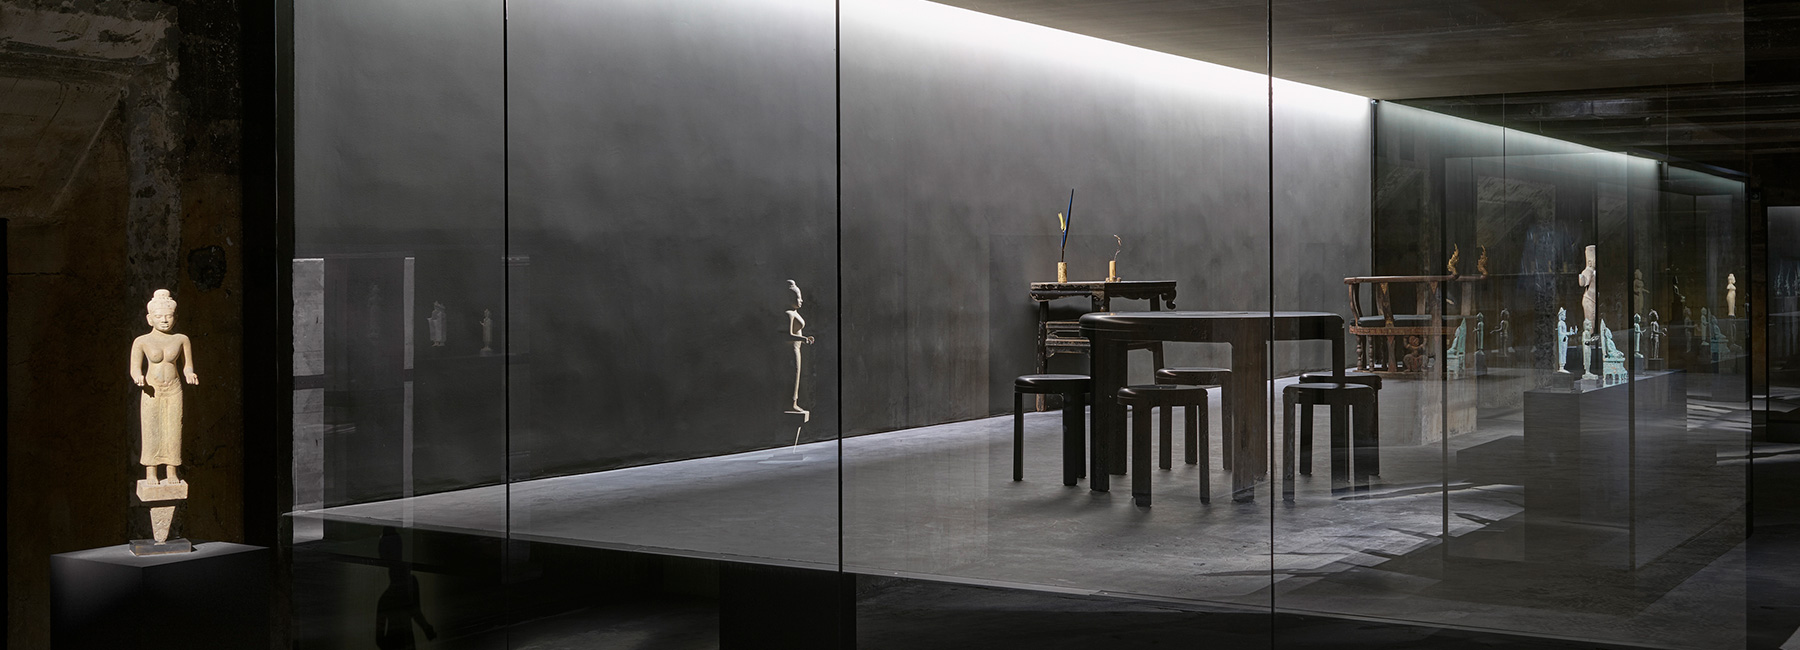 the feuerle collection opens immersive incense room in berlin